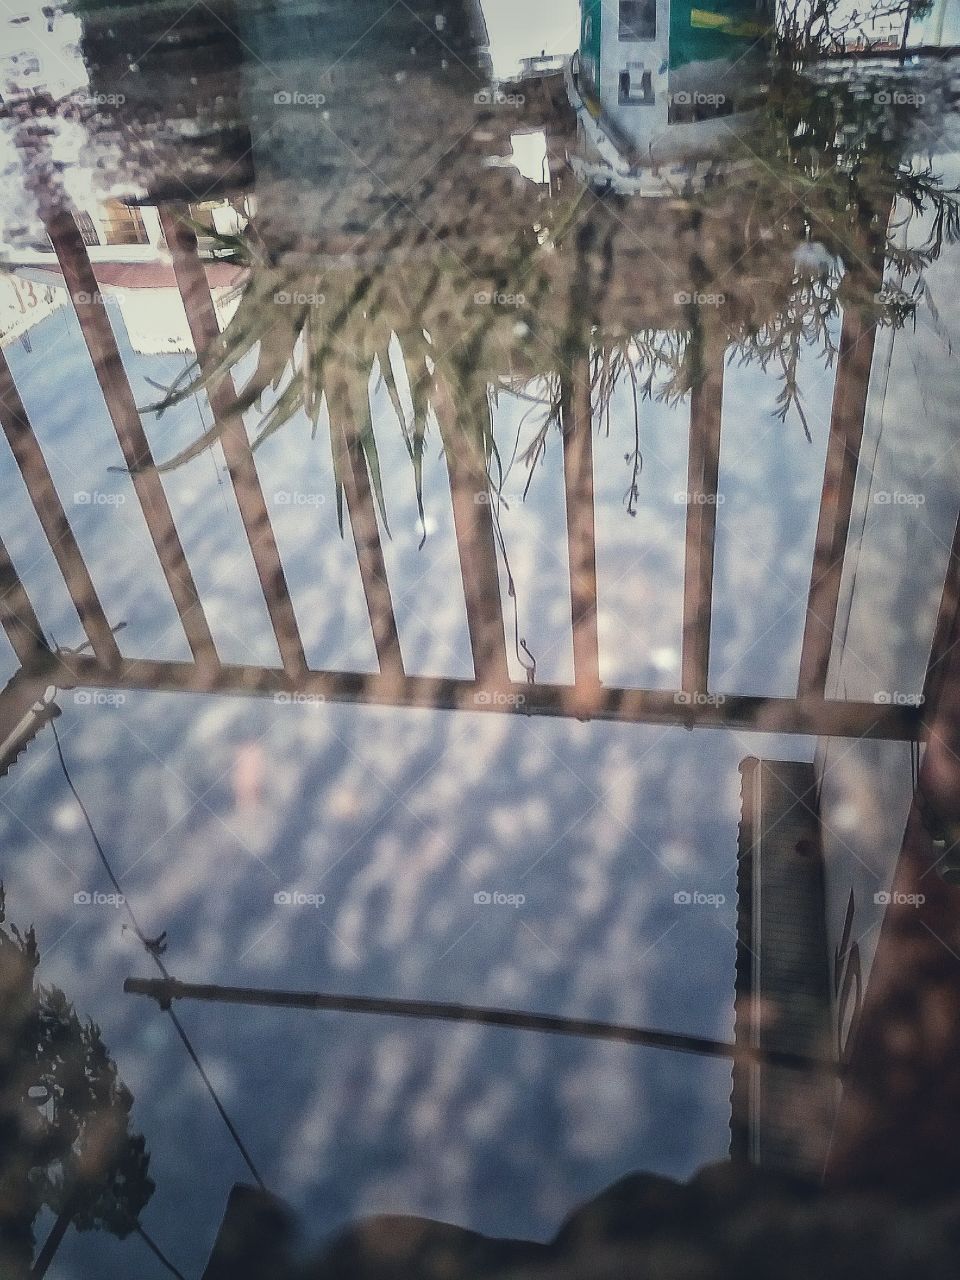 The reflection of the water